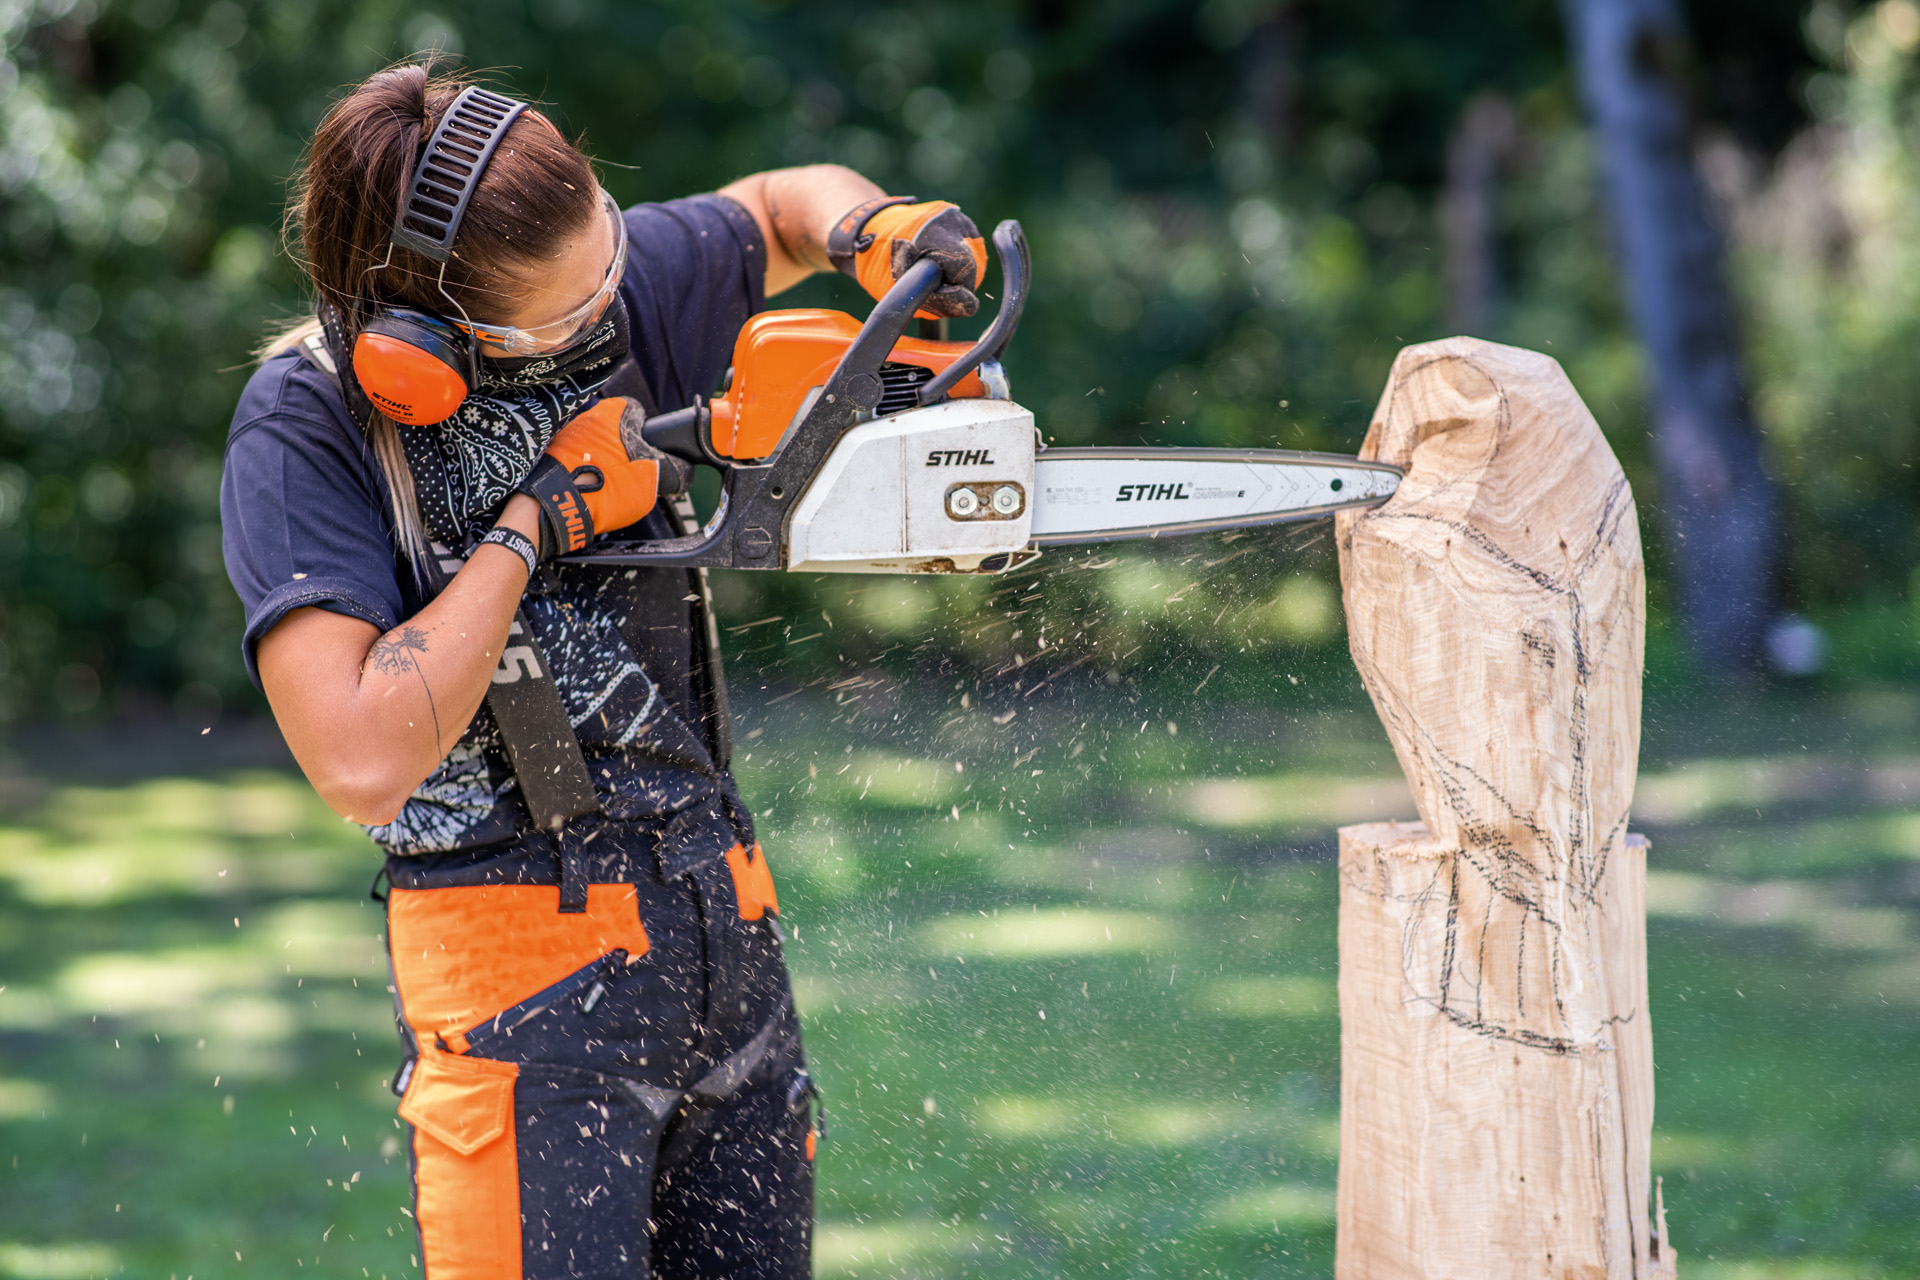 A woman wearing protective equipment carving a wooden owl with a chainsaw